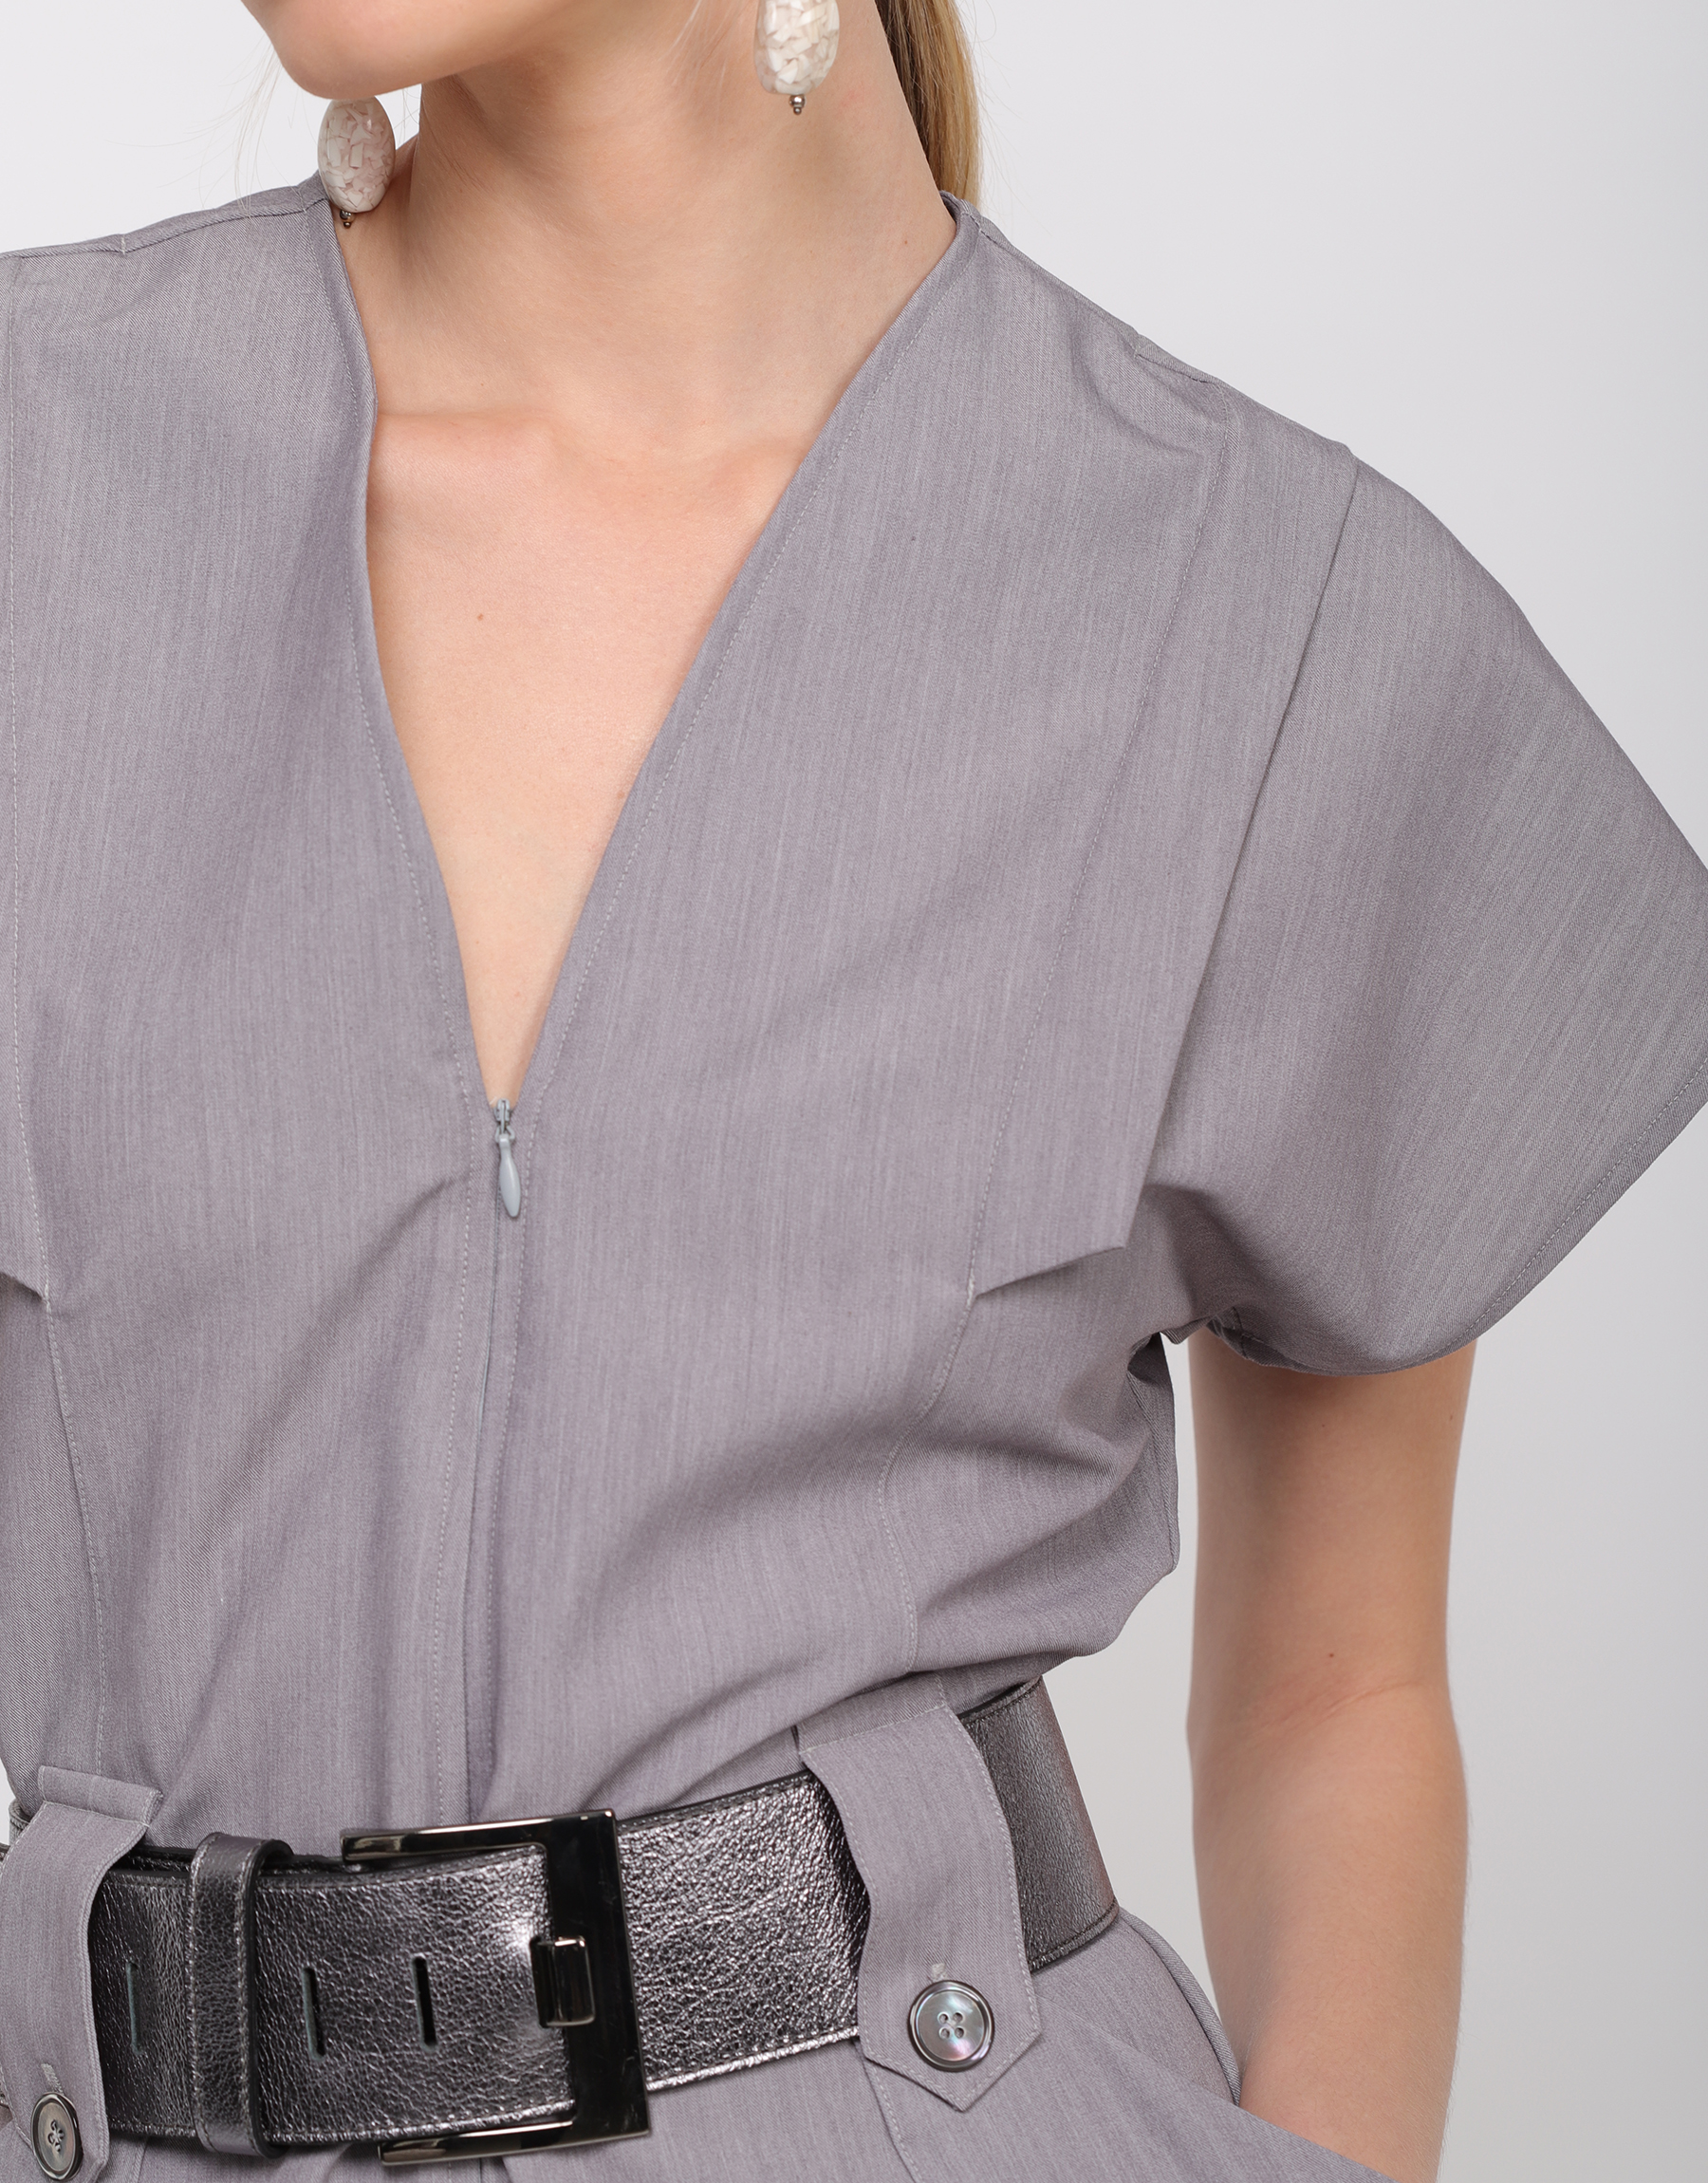 Short-sleeved jumpsuit in pearl grey cotton and viscose